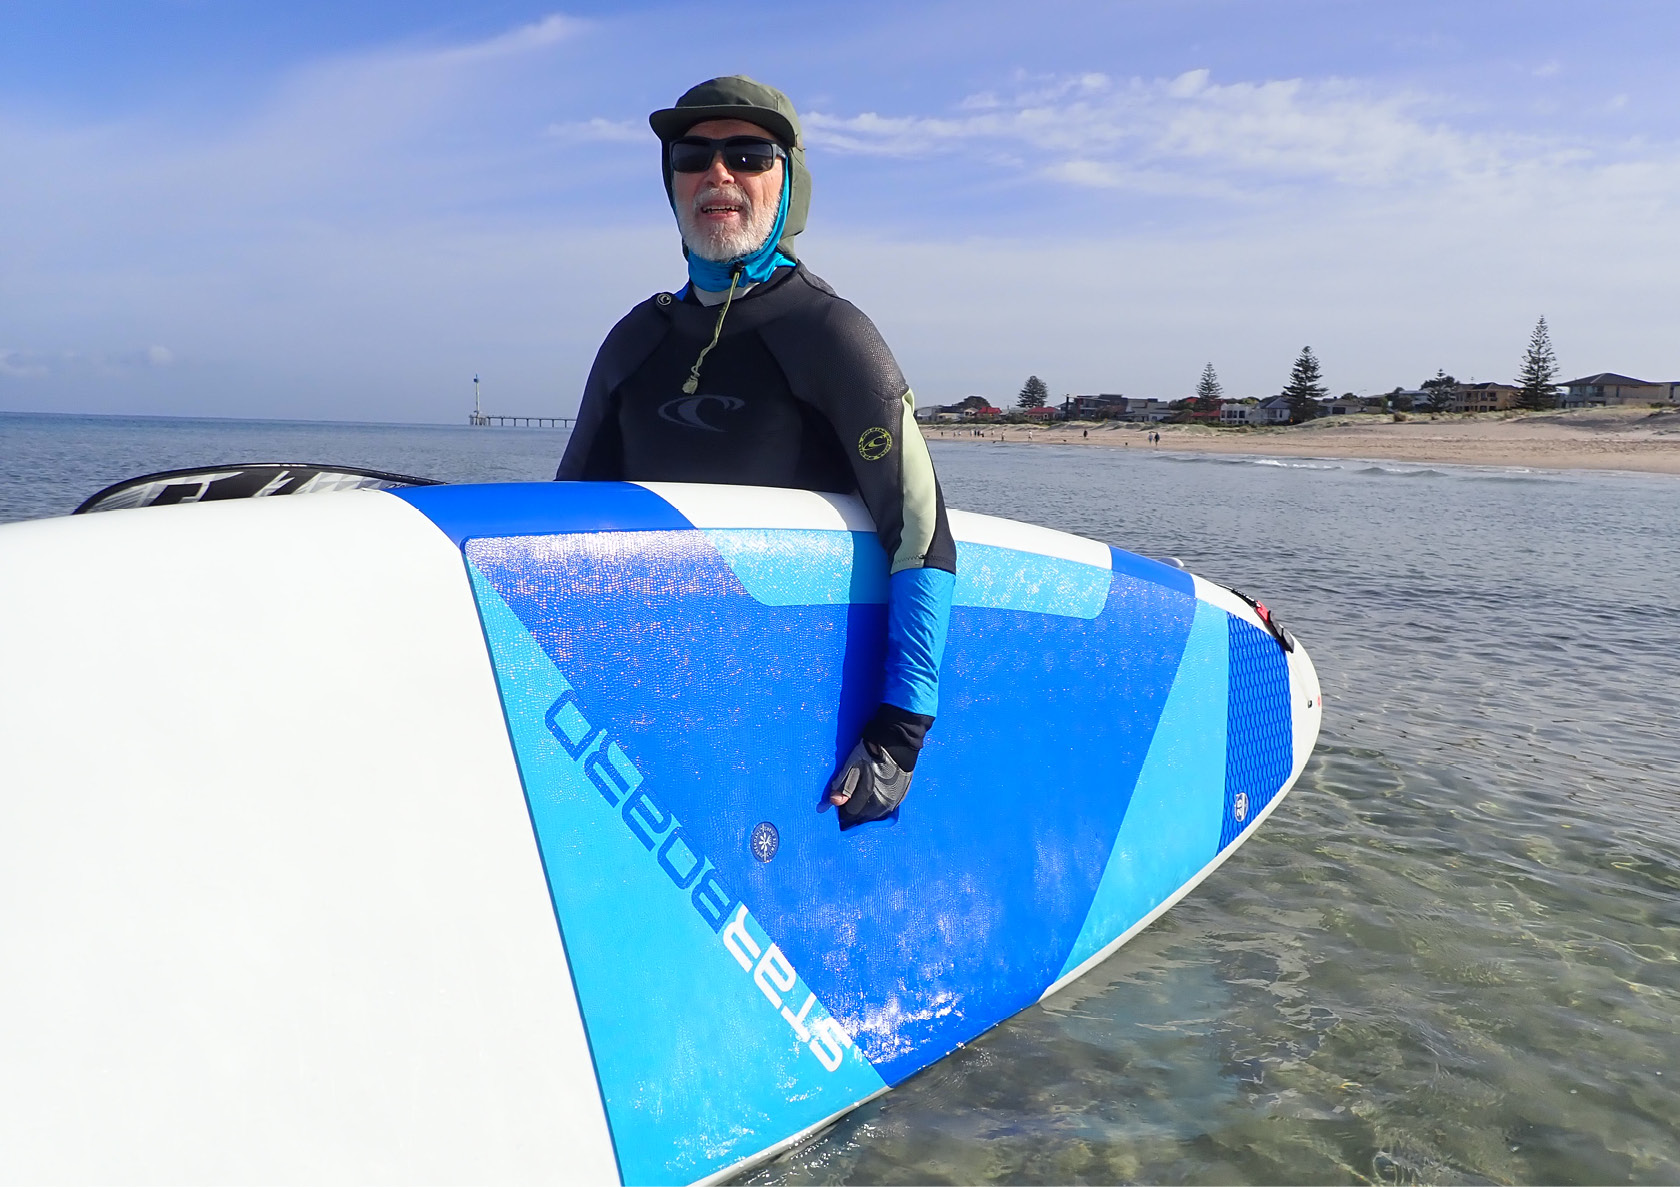 Cancer Connect volunteer Ian holding a surf board at the beach